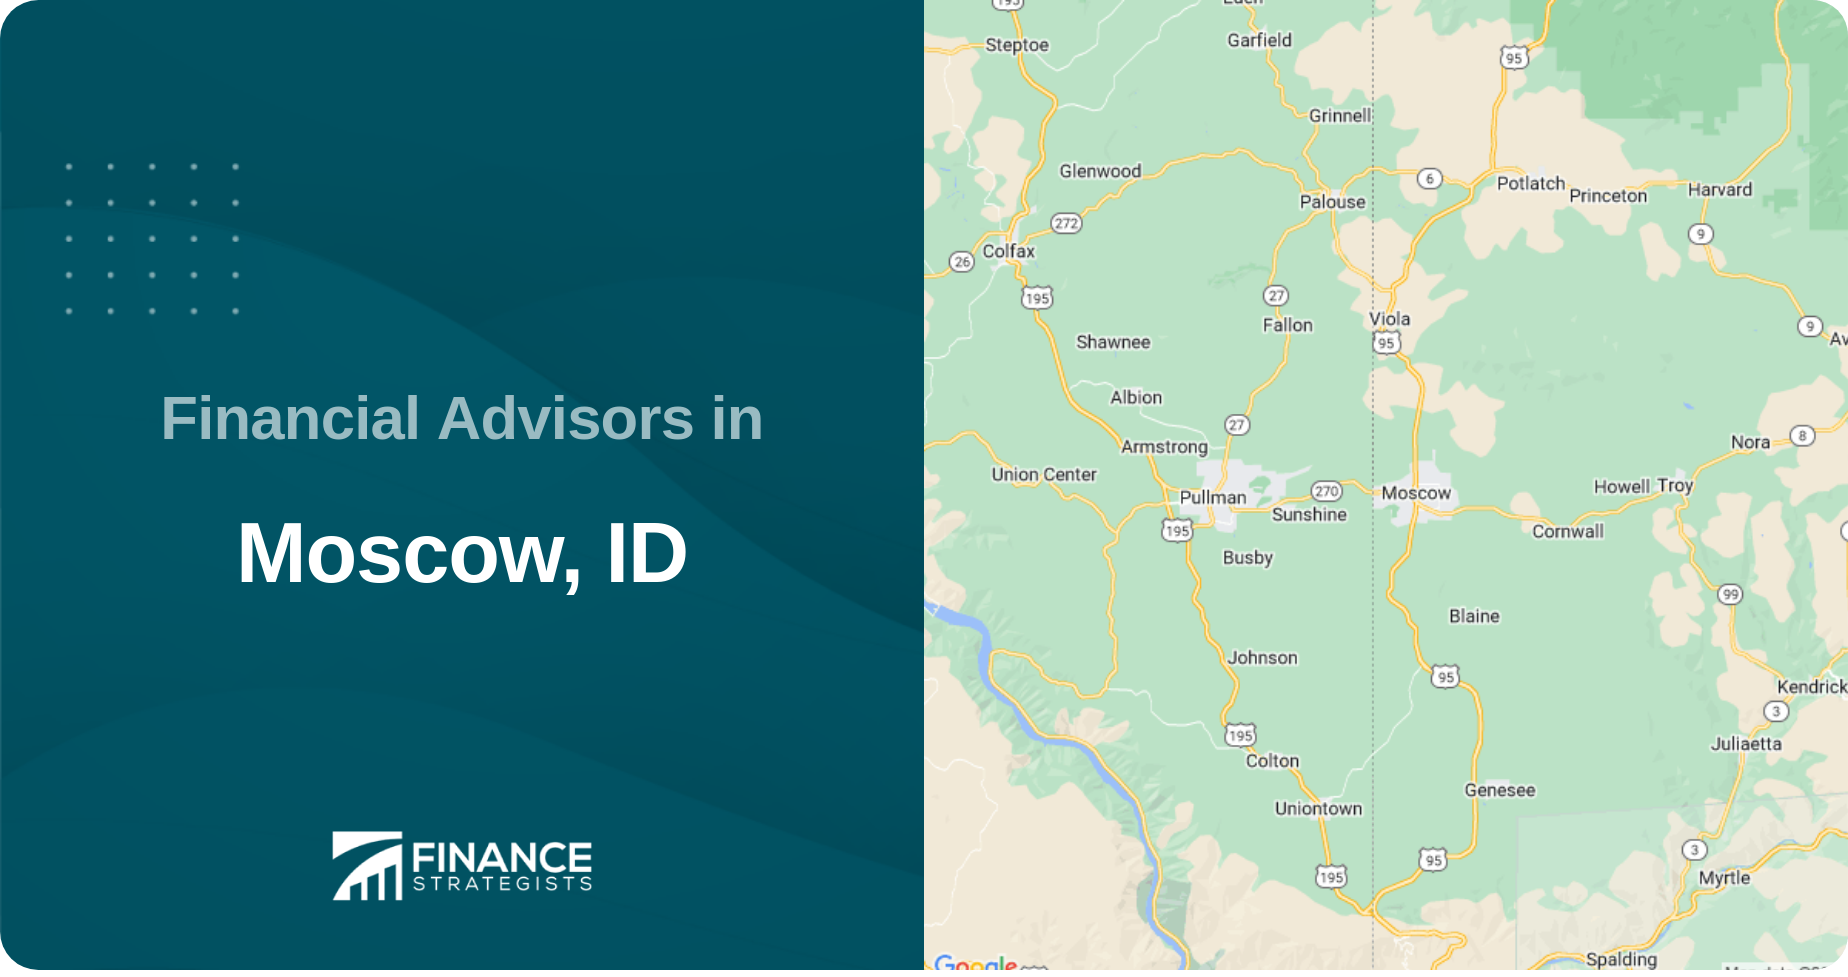 Financial Advisors in Moscow, ID